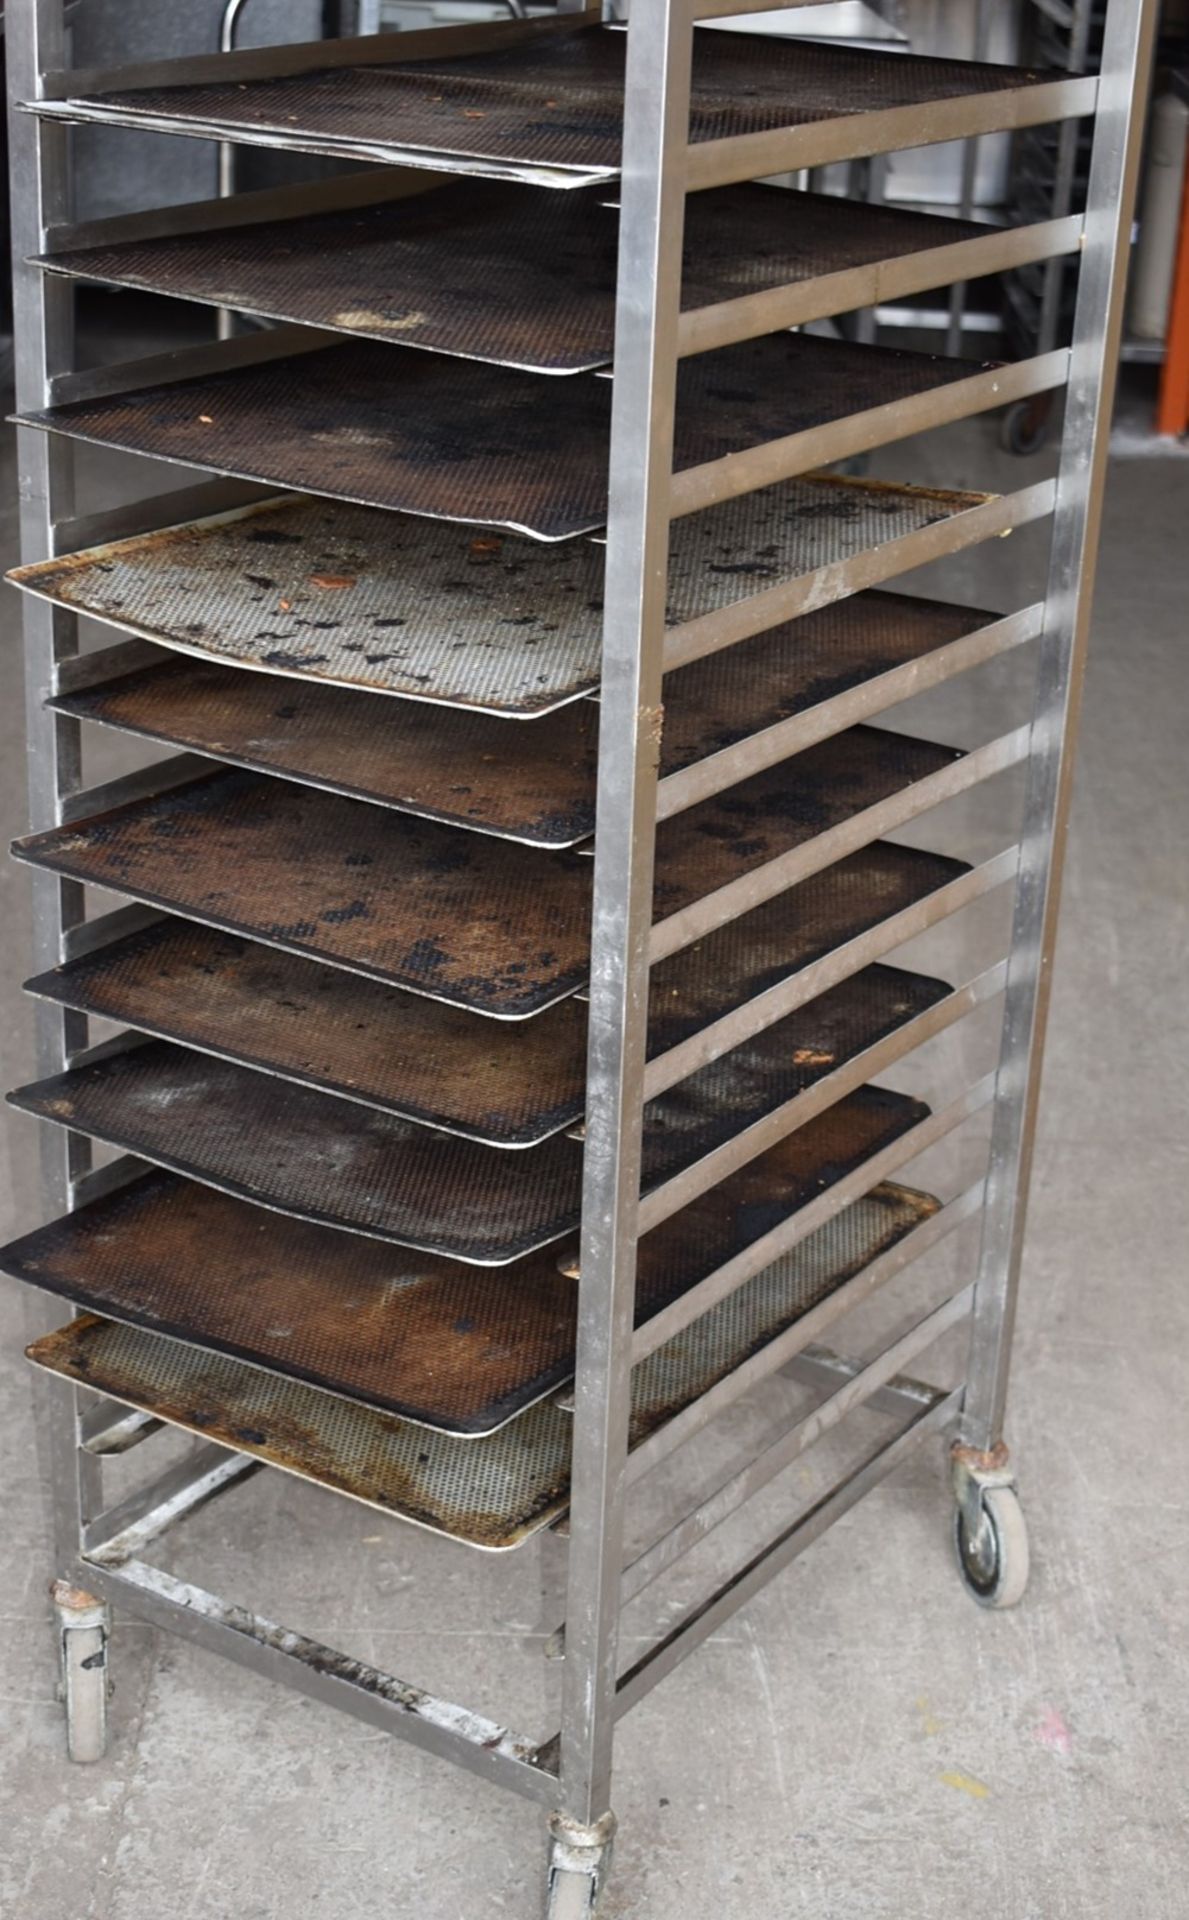 1 x Bakers 18 Tier Mobile Tray Rack With 16 Perforated Trays - Stainless Steel With Castors - - Image 3 of 8